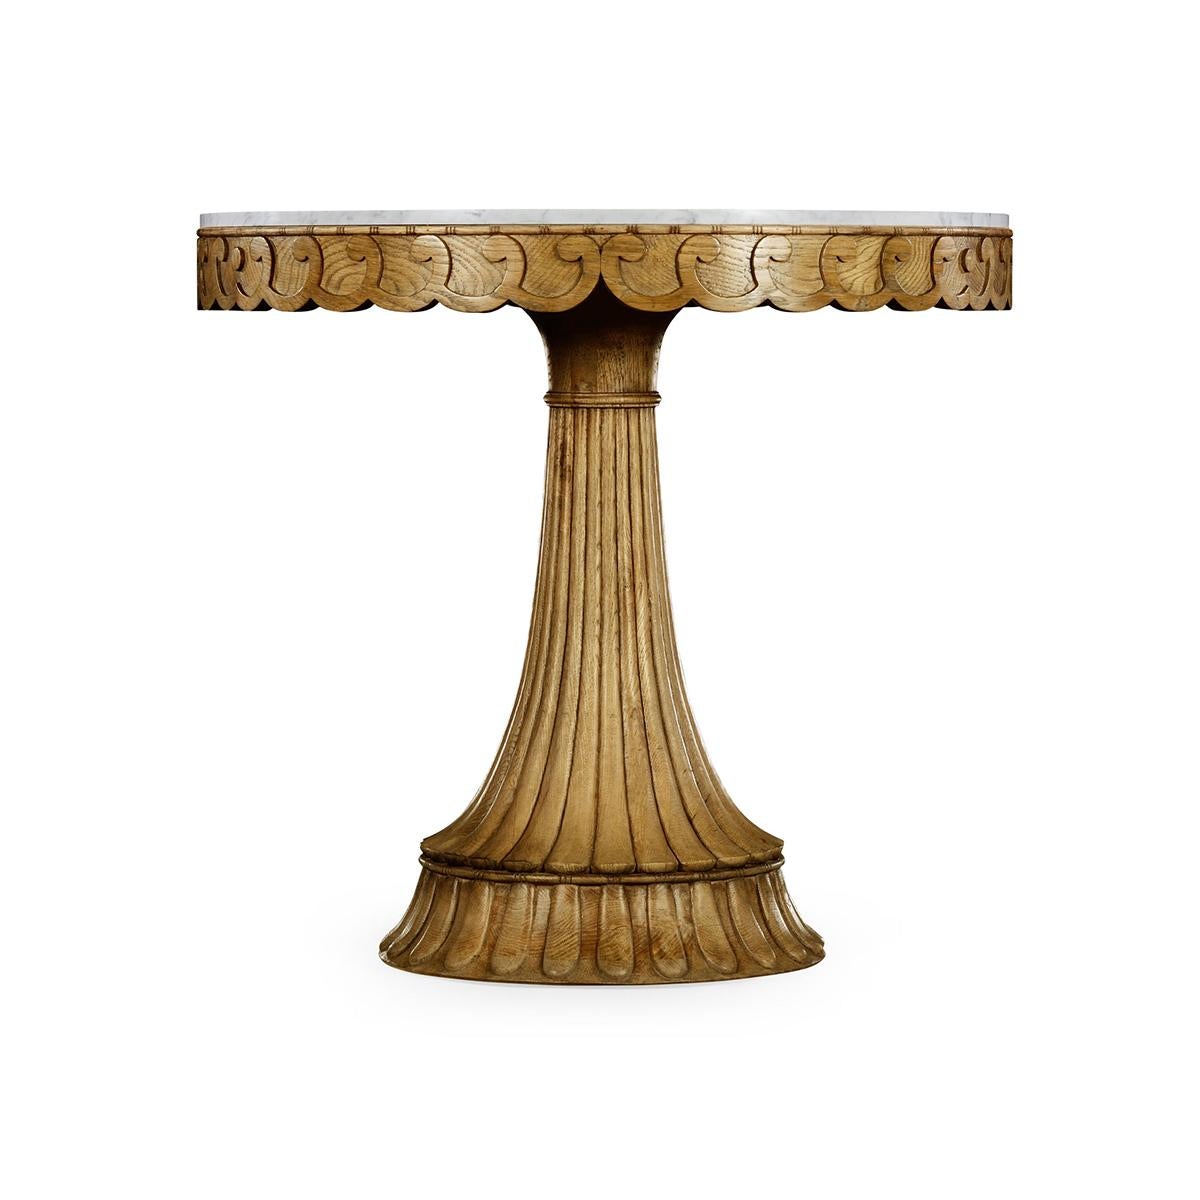 A Scottish style carved oak round center table with an Italian Carrara marble top, carved vetruvian scroll work frieze, and out flaring fluted pedestal base. 

Dimensions: 35.5